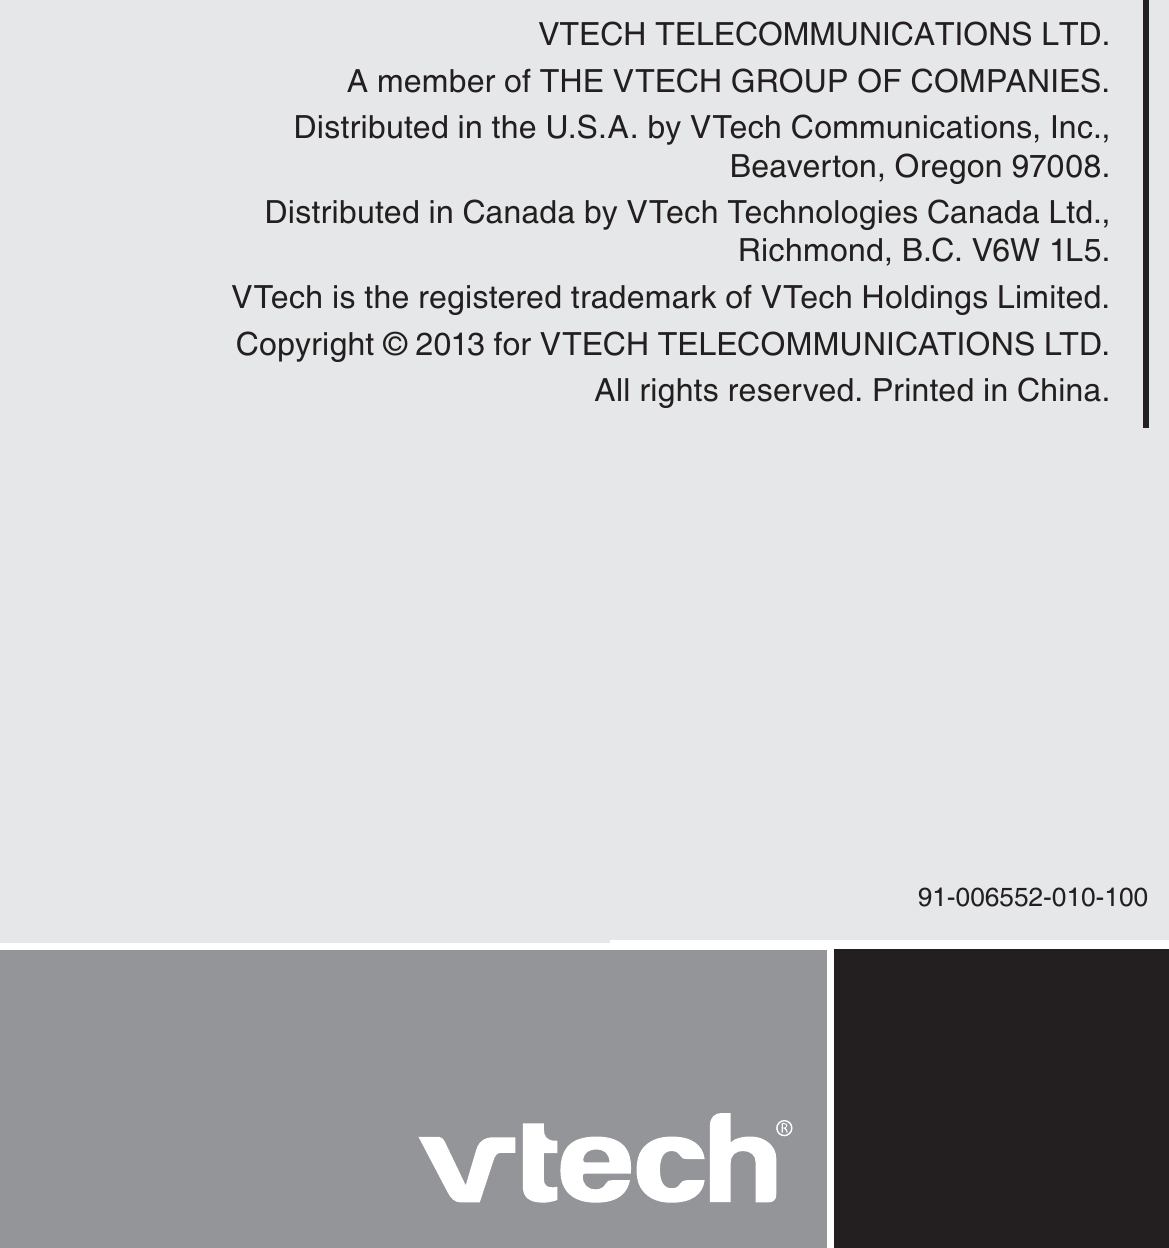 VTECH TELECOMMUNICATIONS LTD.A member of THE VTECH GROUP OF COMPANIES.Distributed in the U.S.A. by VTech Communications, Inc.,  Beaverton, Oregon 97008.Distributed in Canada by VTech Technologies Canada Ltd., Richmond, B.C. V6W 1L5.VTech is the registered trademark of VTech Holdings Limited.Copyright © 2013 for VTECH TELECOMMUNICATIONS LTD.All rights reserved. Printed in China.91-006552-010-100